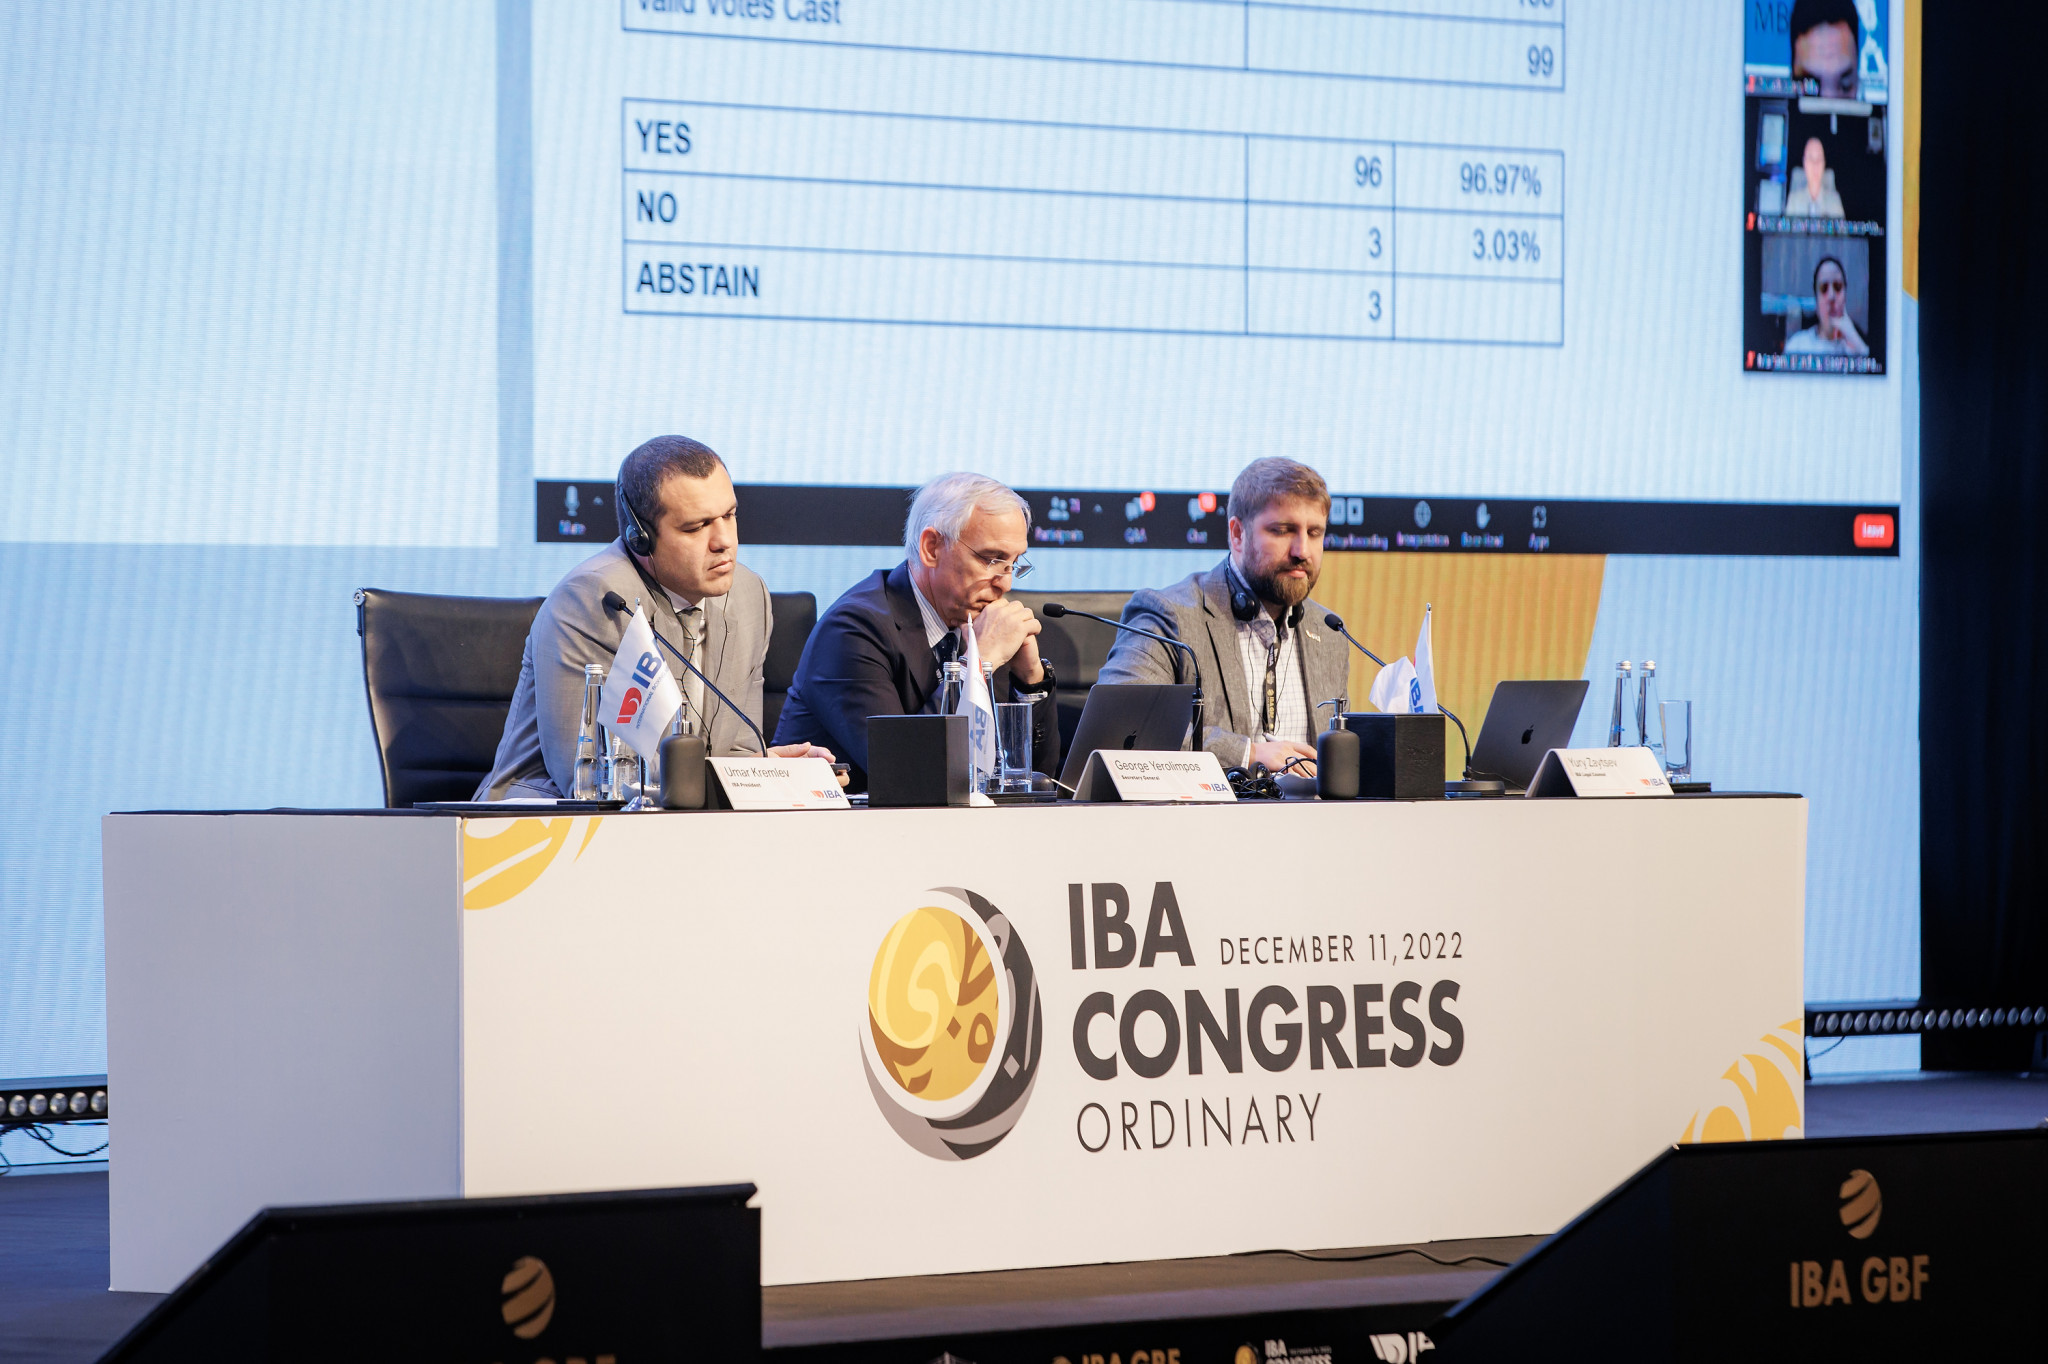 IBA closes out Global Boxing Forum with Congress and Champions' Night